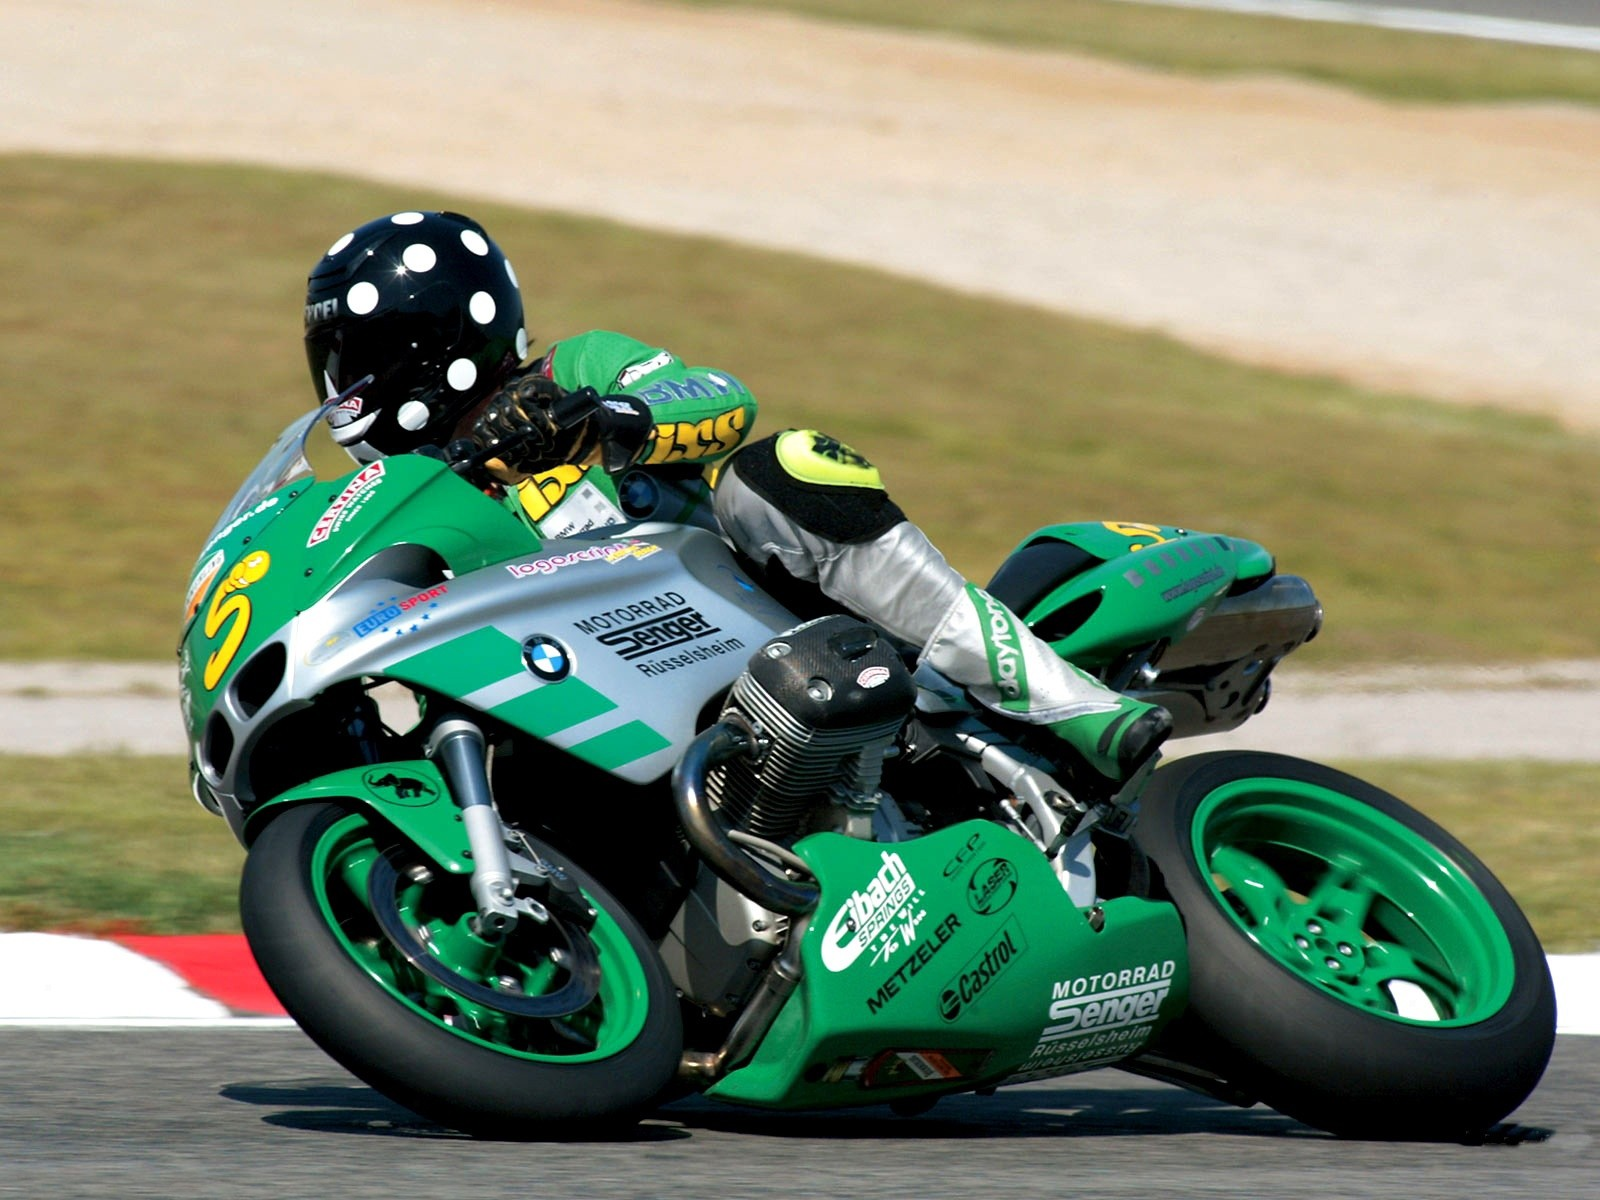 Green Bmw Motorcycle Racing - Bmw Boxer Cup - HD Wallpaper 